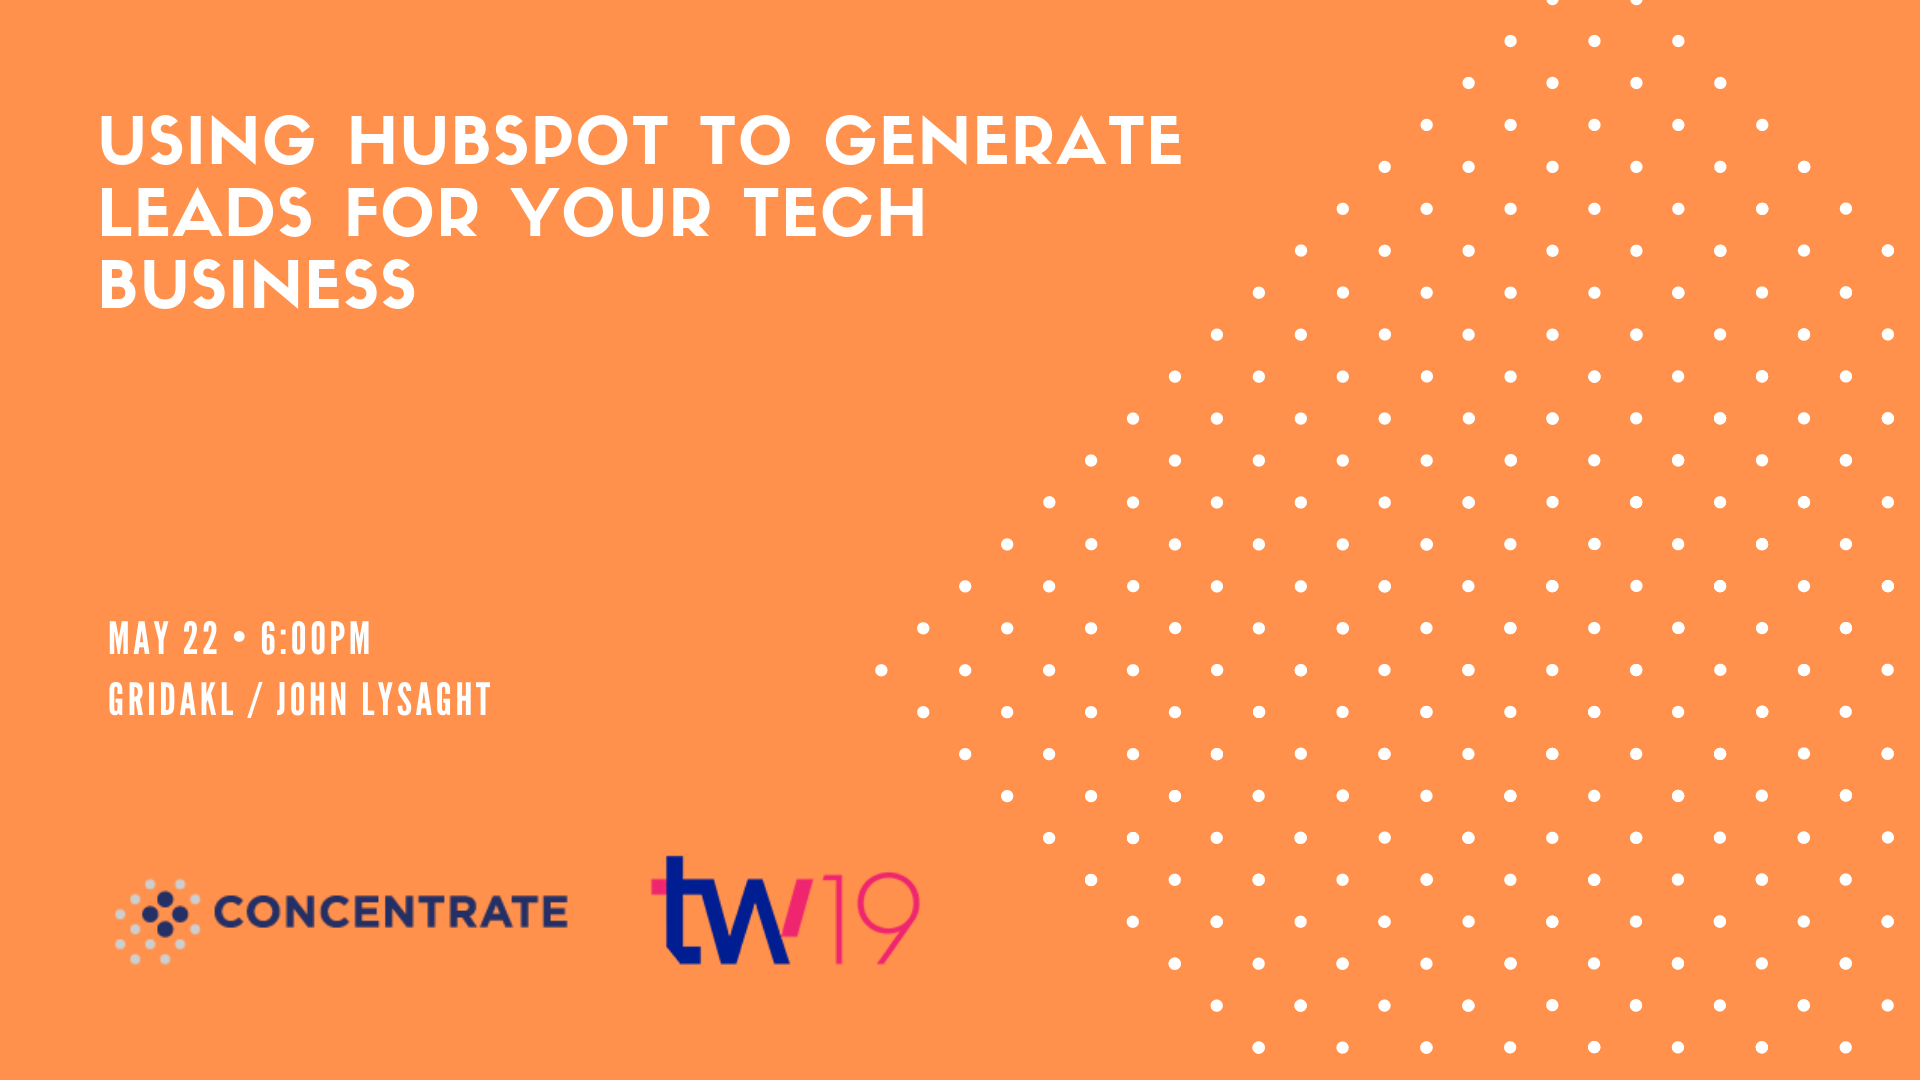 Using HubSpot to generate leads for your tech business